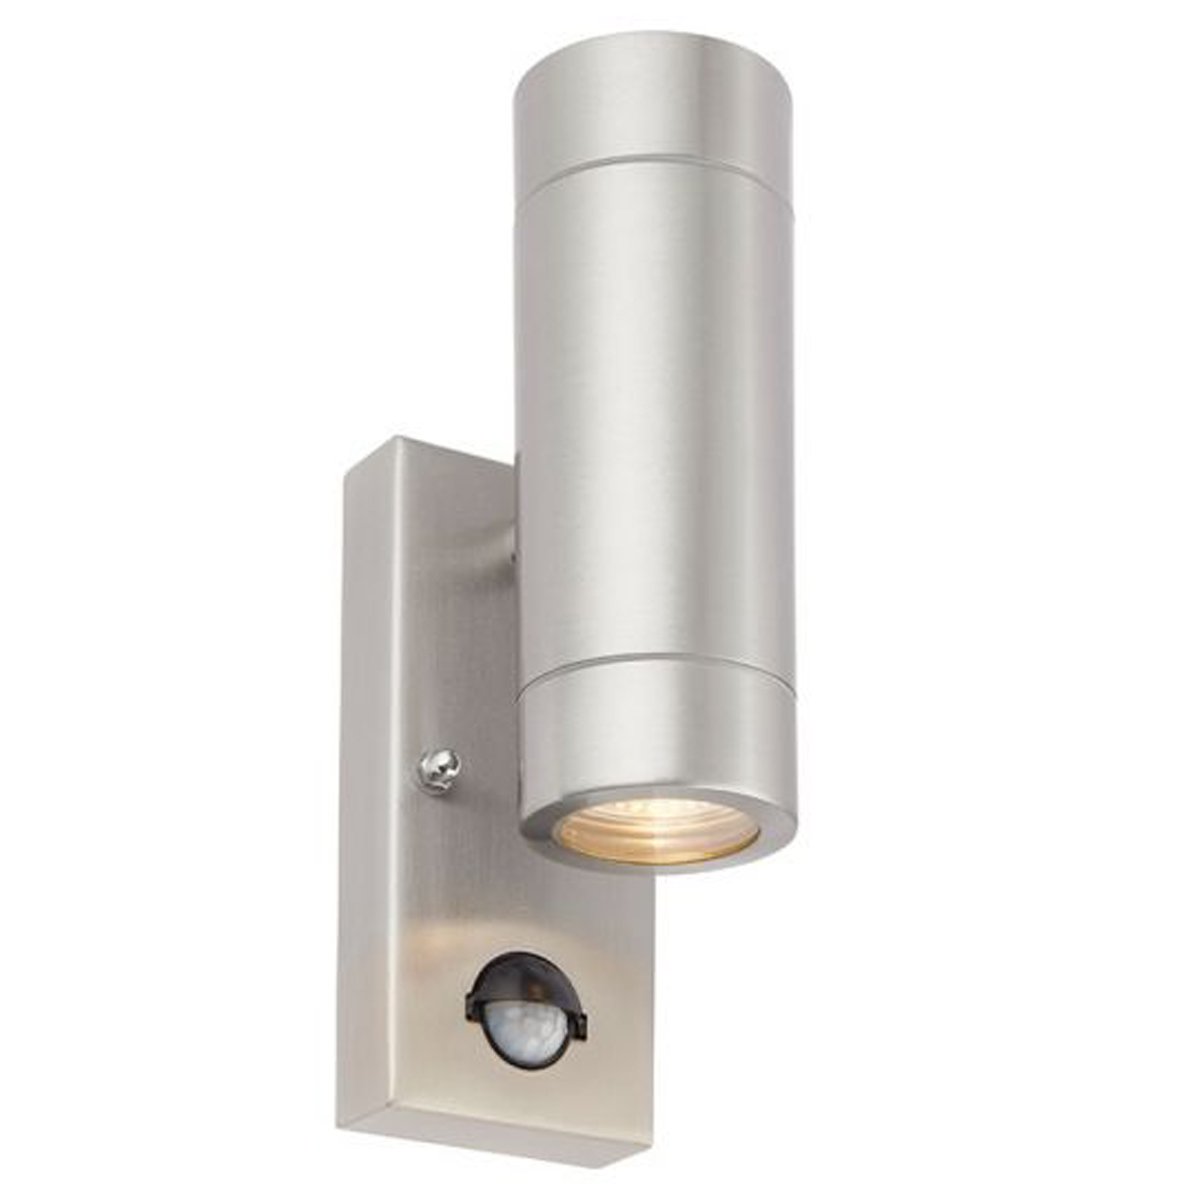 CGC SONIA Stainless Steel Double Outdoor Light With Motion Sensor